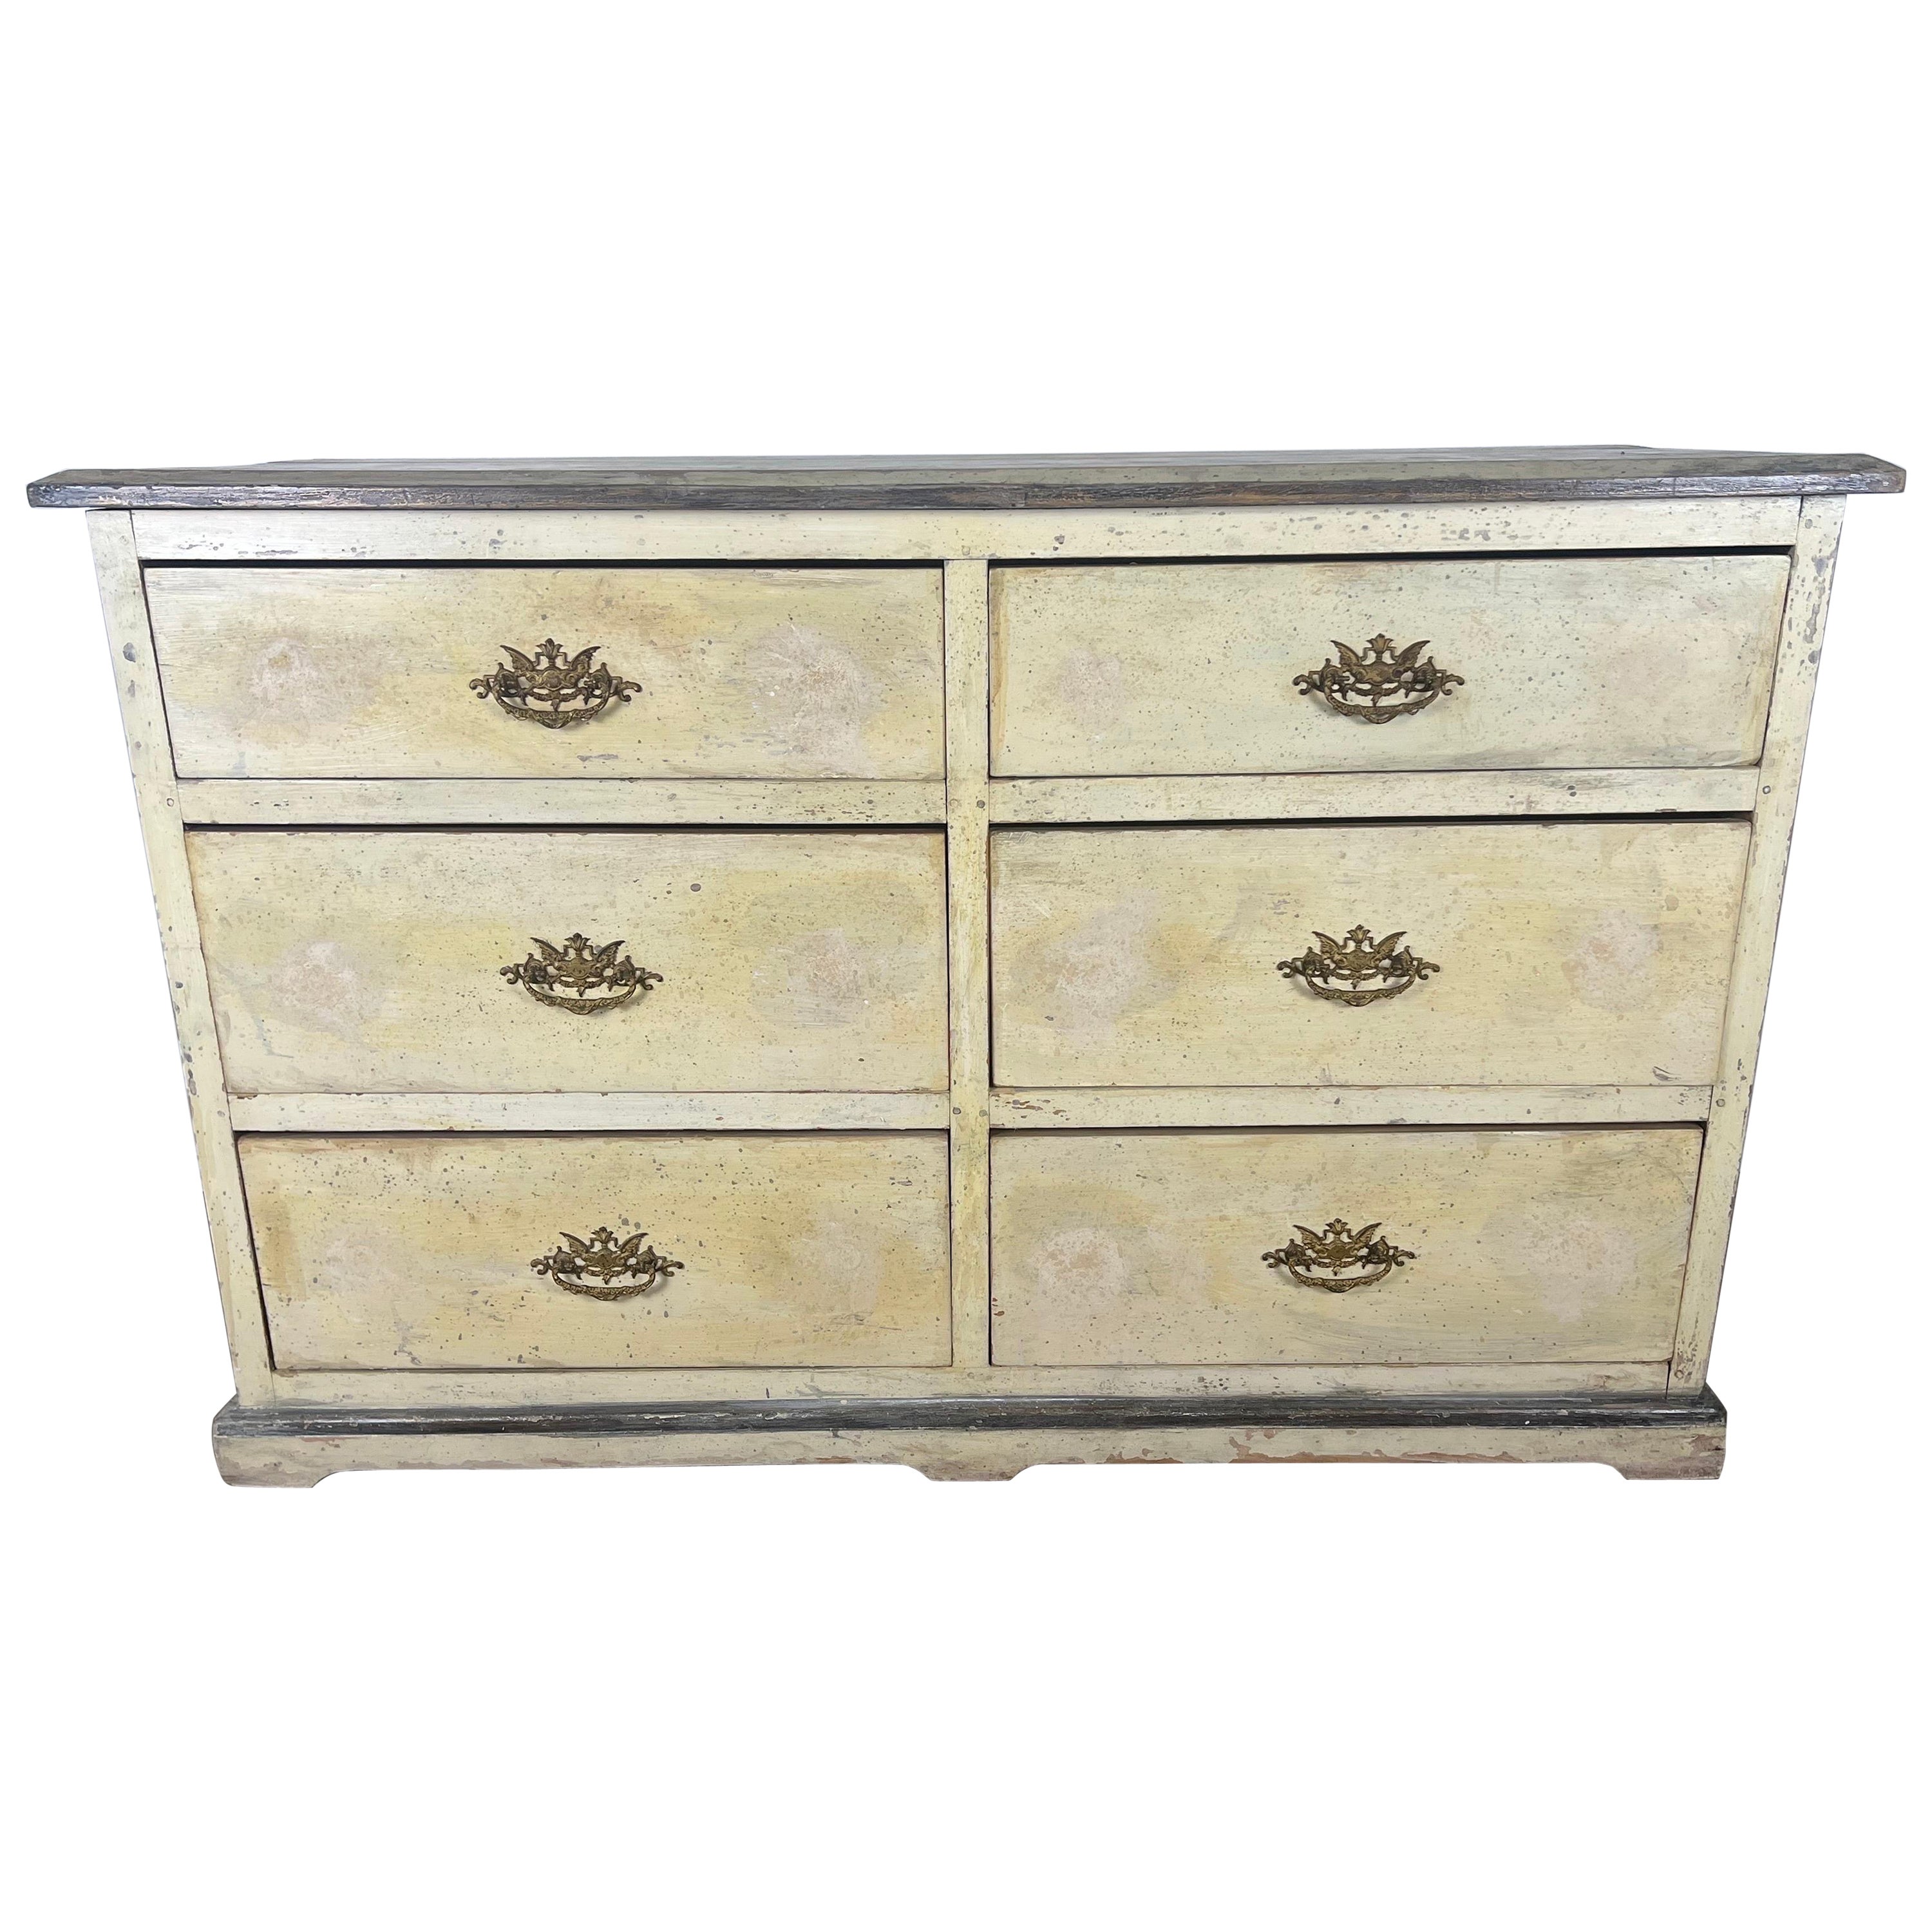 19th C. Gustavian Style Swedish Painted Chest of Drawers